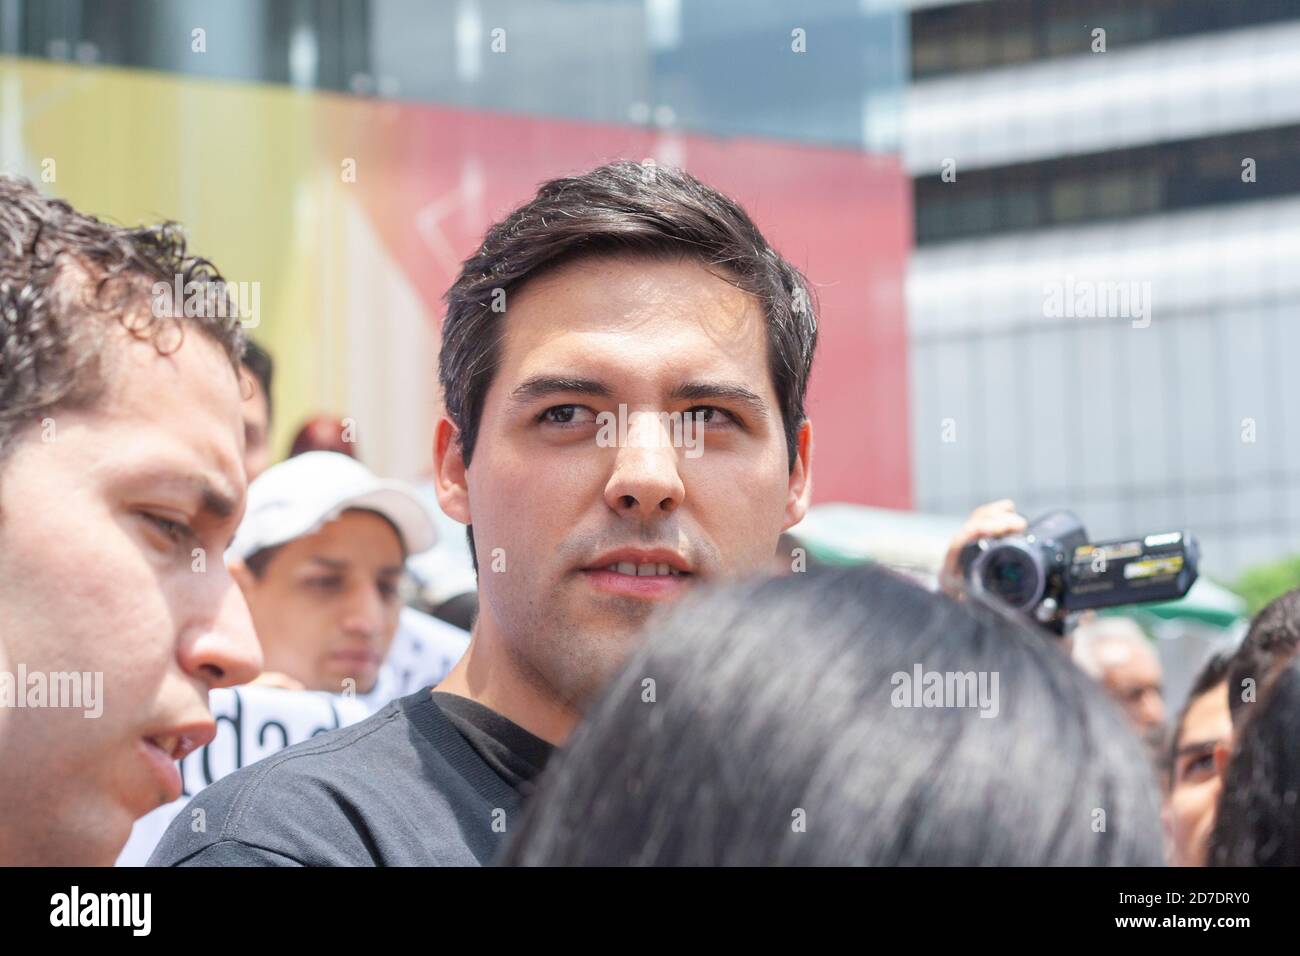 CARACAS, VENEZUELA - MARCH 23: Yon Goicochea talks to members of the media during a protest in Caracas, on March 23, 2011. Stock Photo